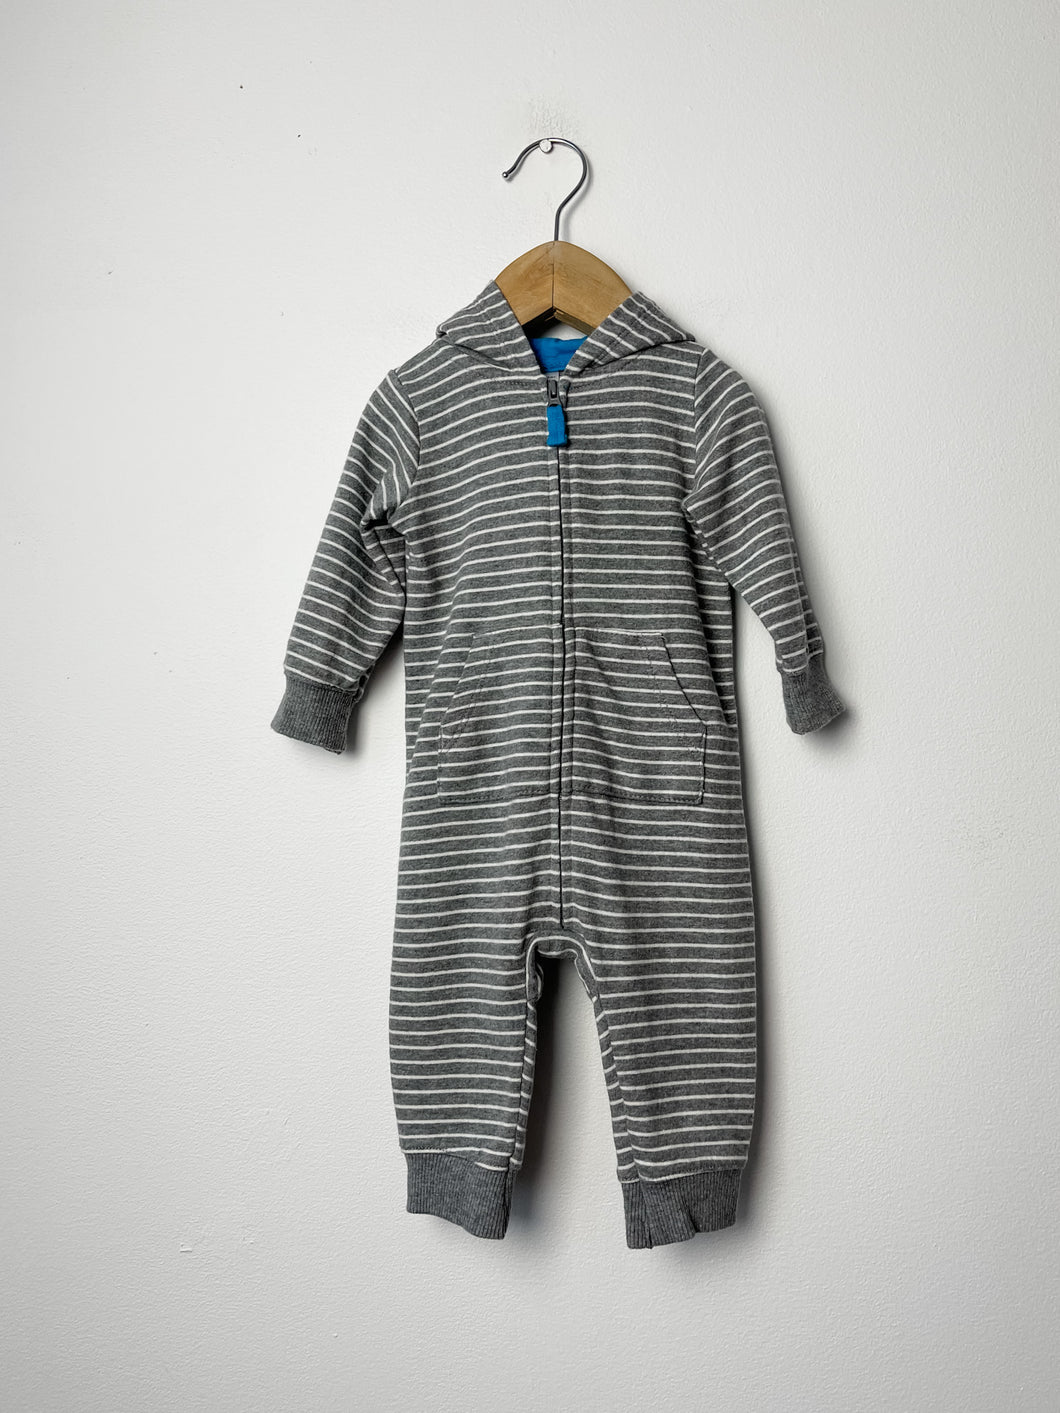 Striped Carters Romper Size 6 Months